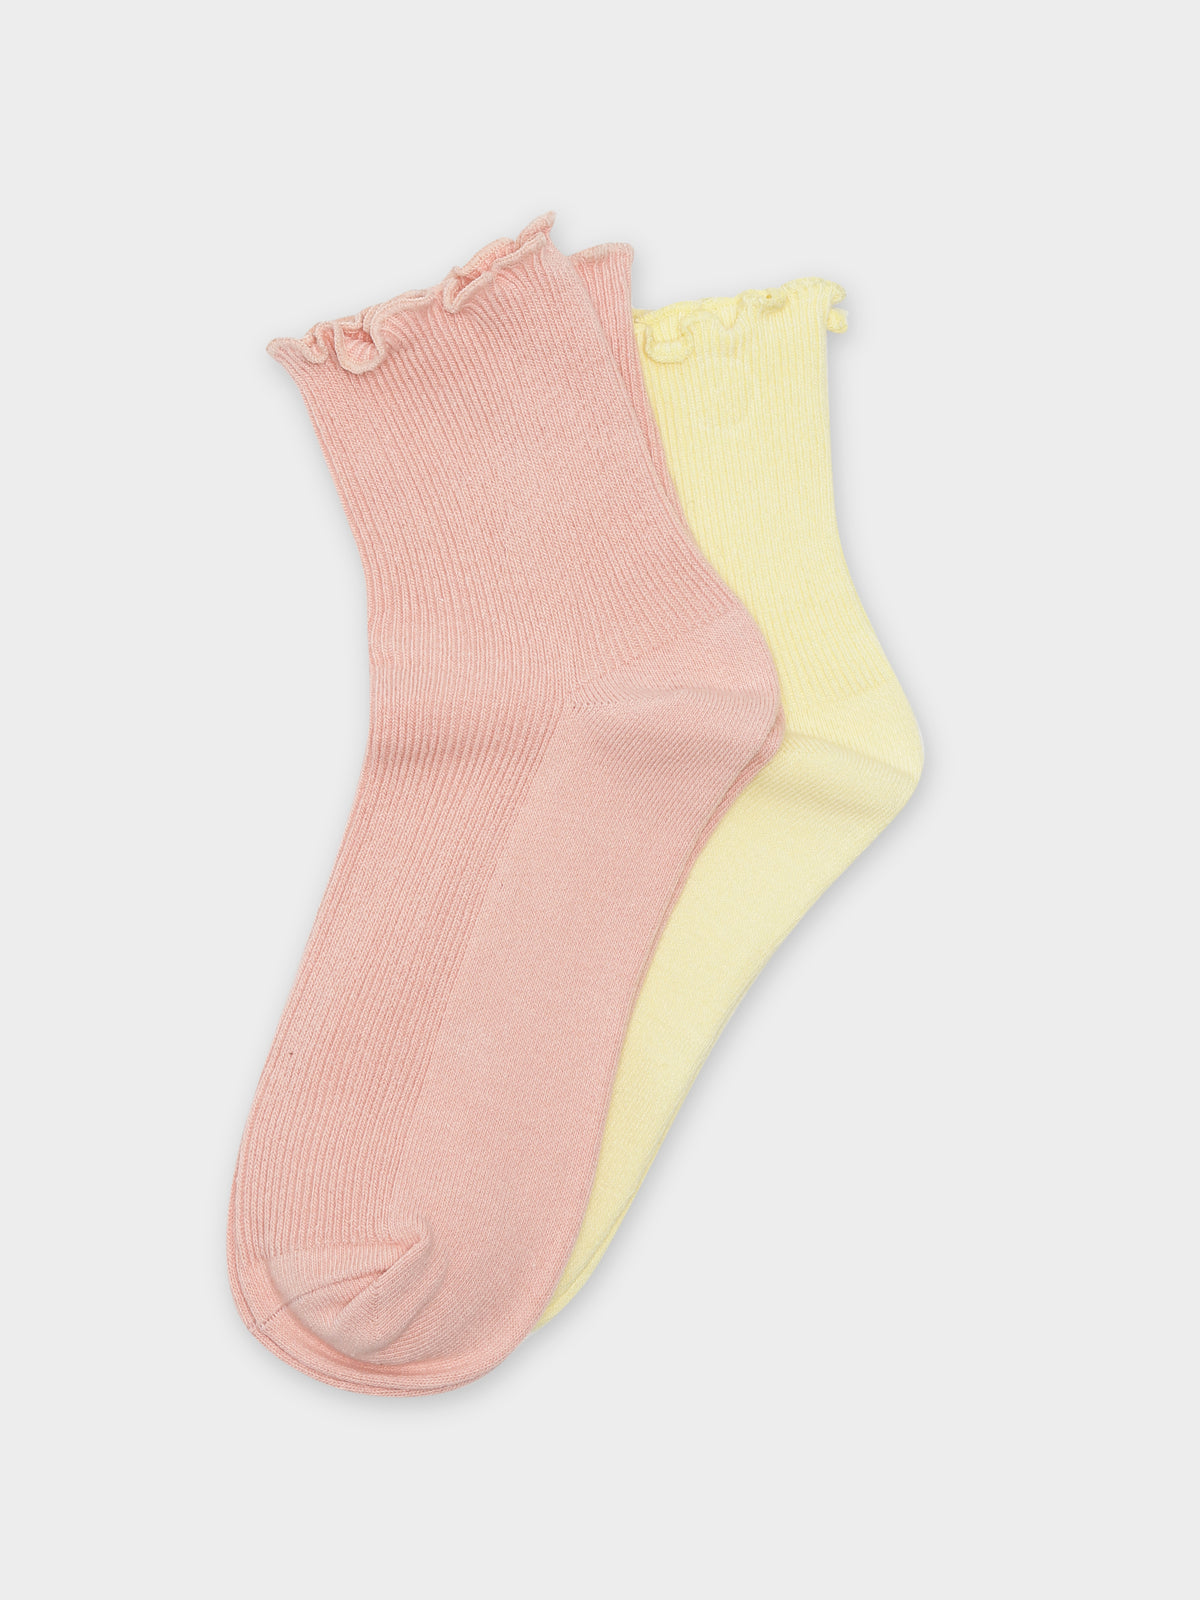 2 Pairs of Ruffle Ankle Socks in Rose and Lemon